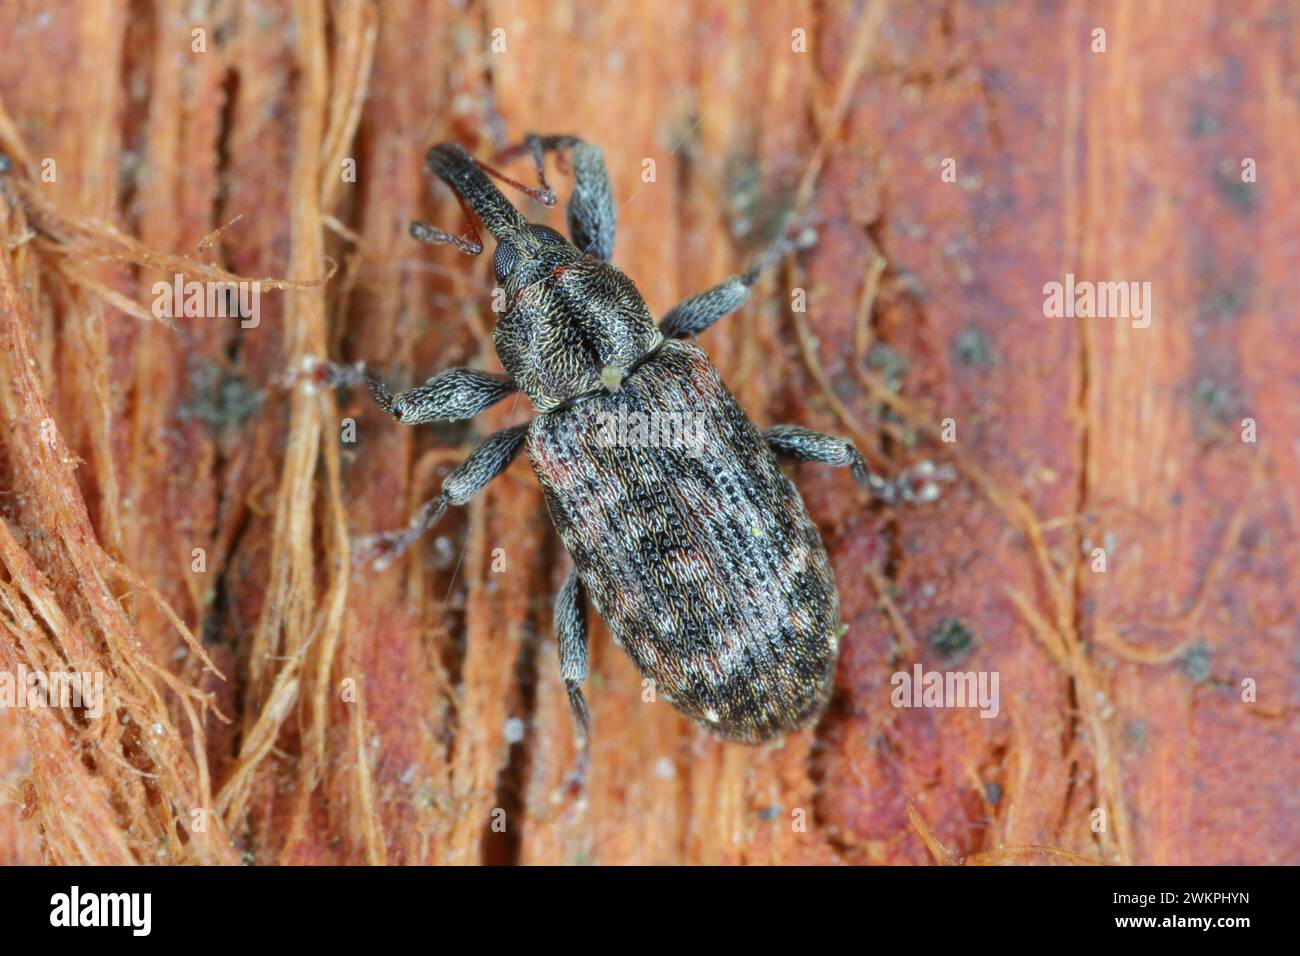 Dorytomus taeniatus A weevil of the family Curculionidae trophically associated with willows (Salix). Stock Photo